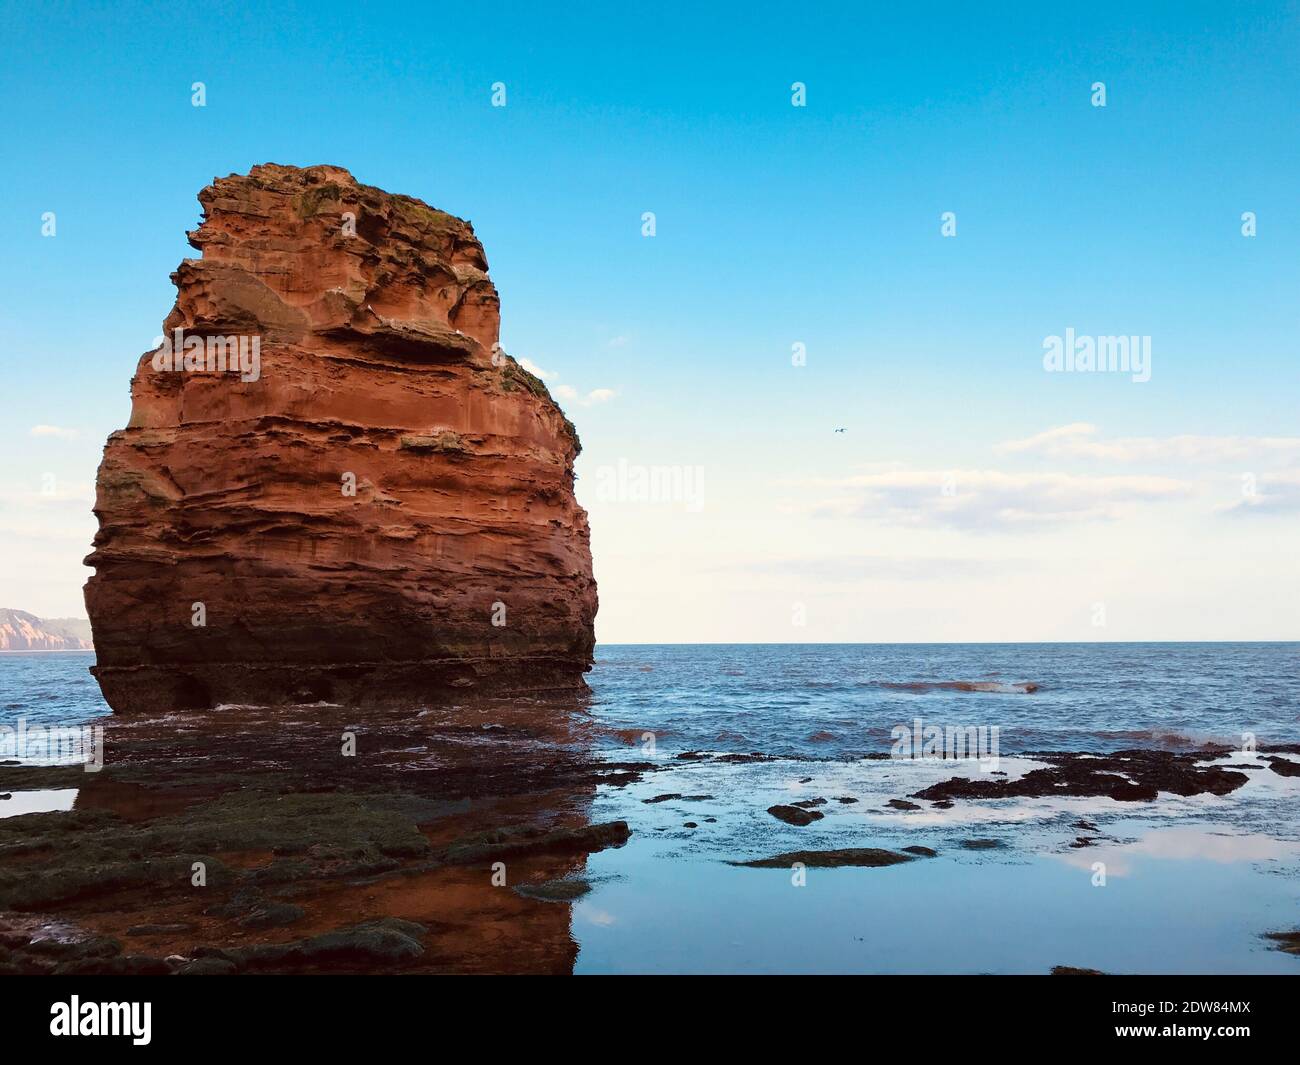 Rock Formation On Sea Against Blue Sky Stock Photo